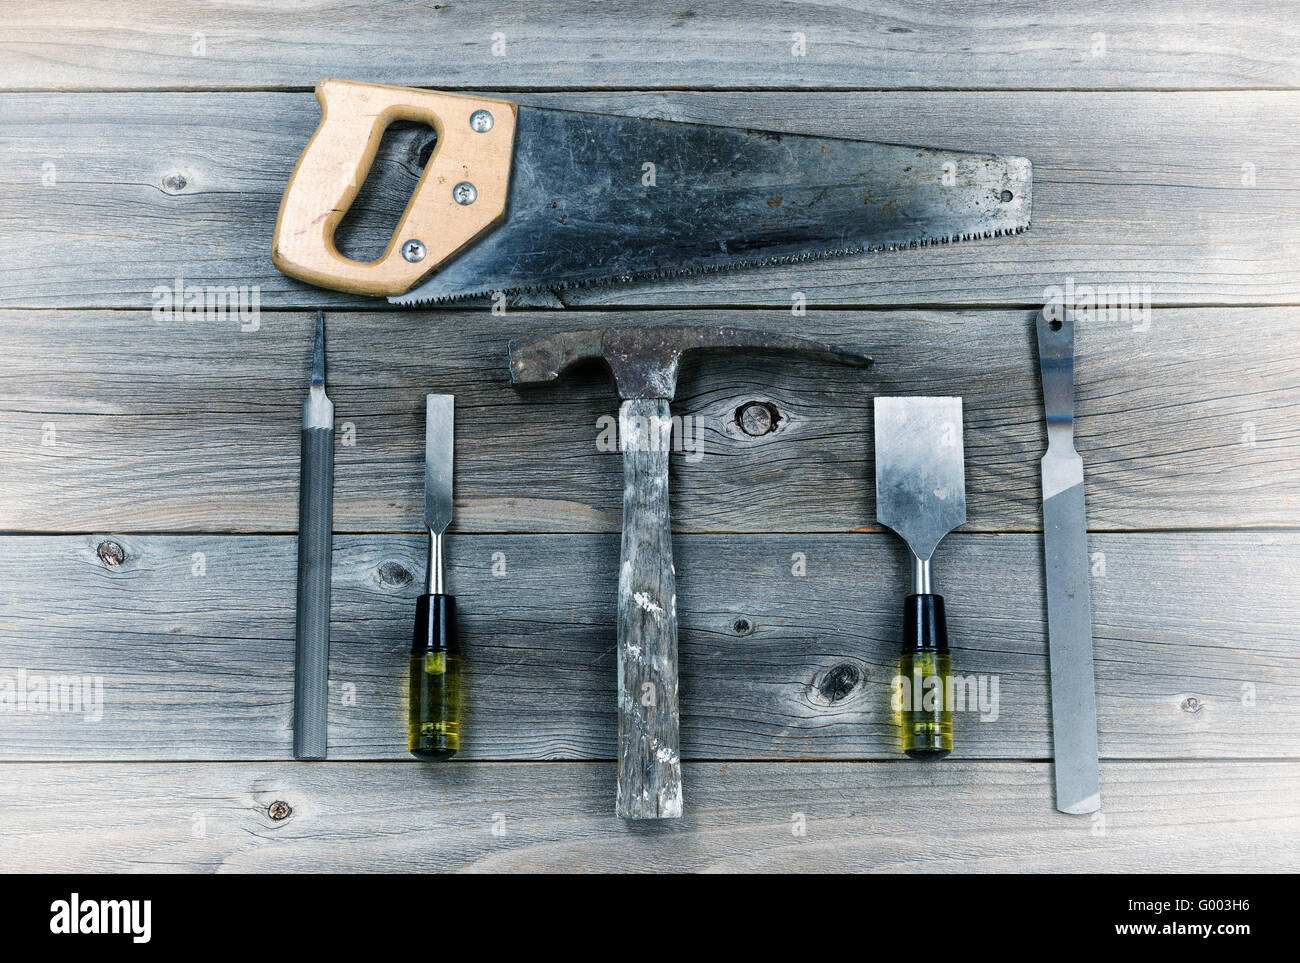 Vintage Hand Tools on Rustic Wooden Boards Stock Photo